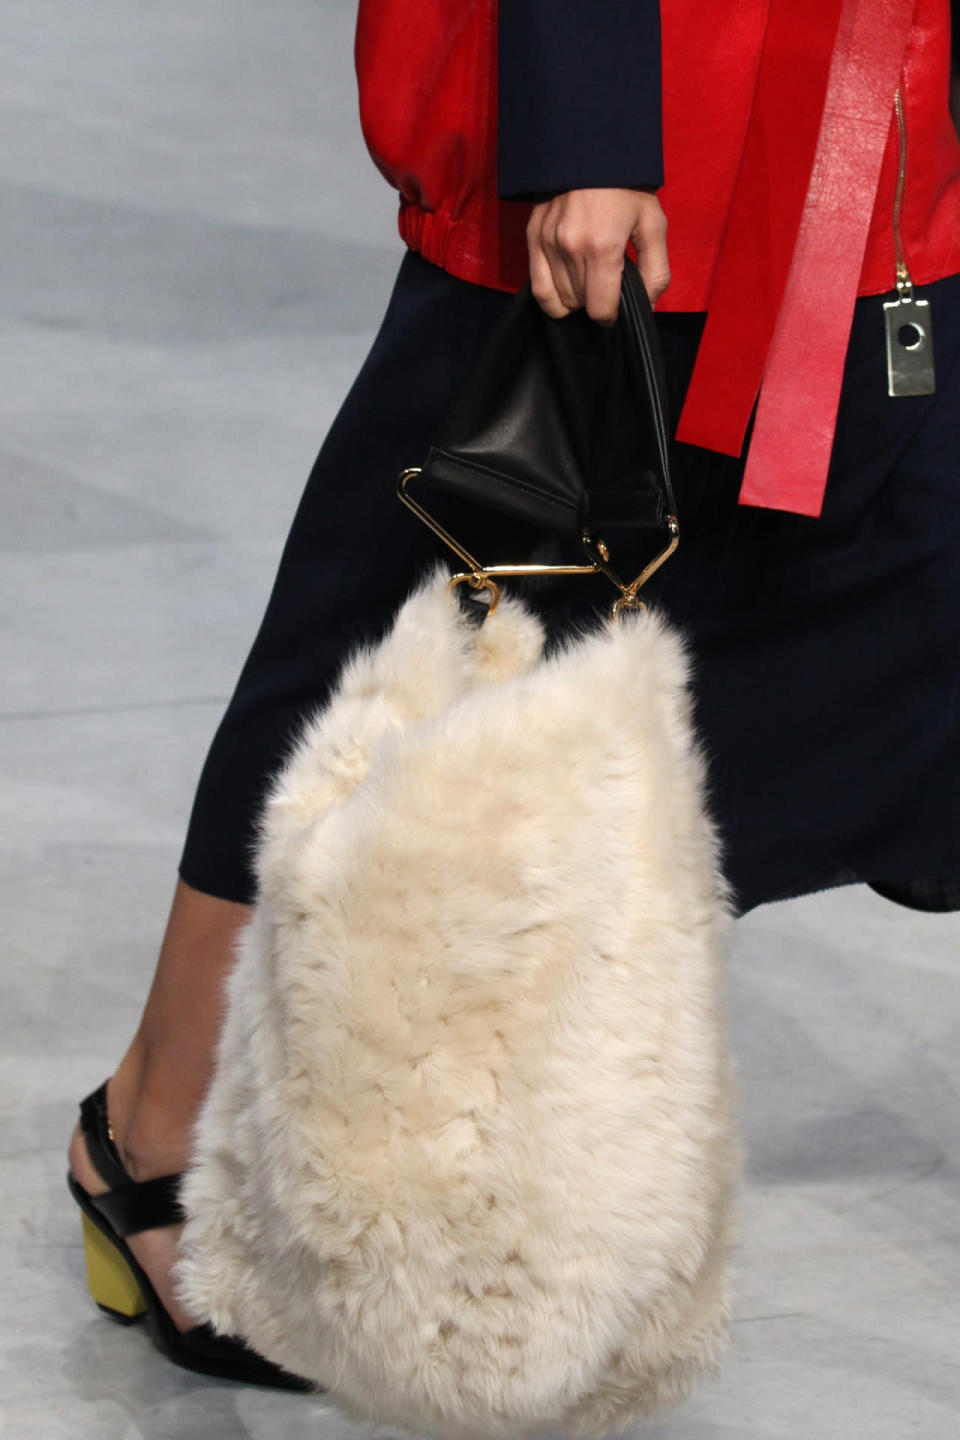 A model carries a giant, faux-fur tote at Marni’s spring 2016 show in Milan. (Photo: Getty Images.)